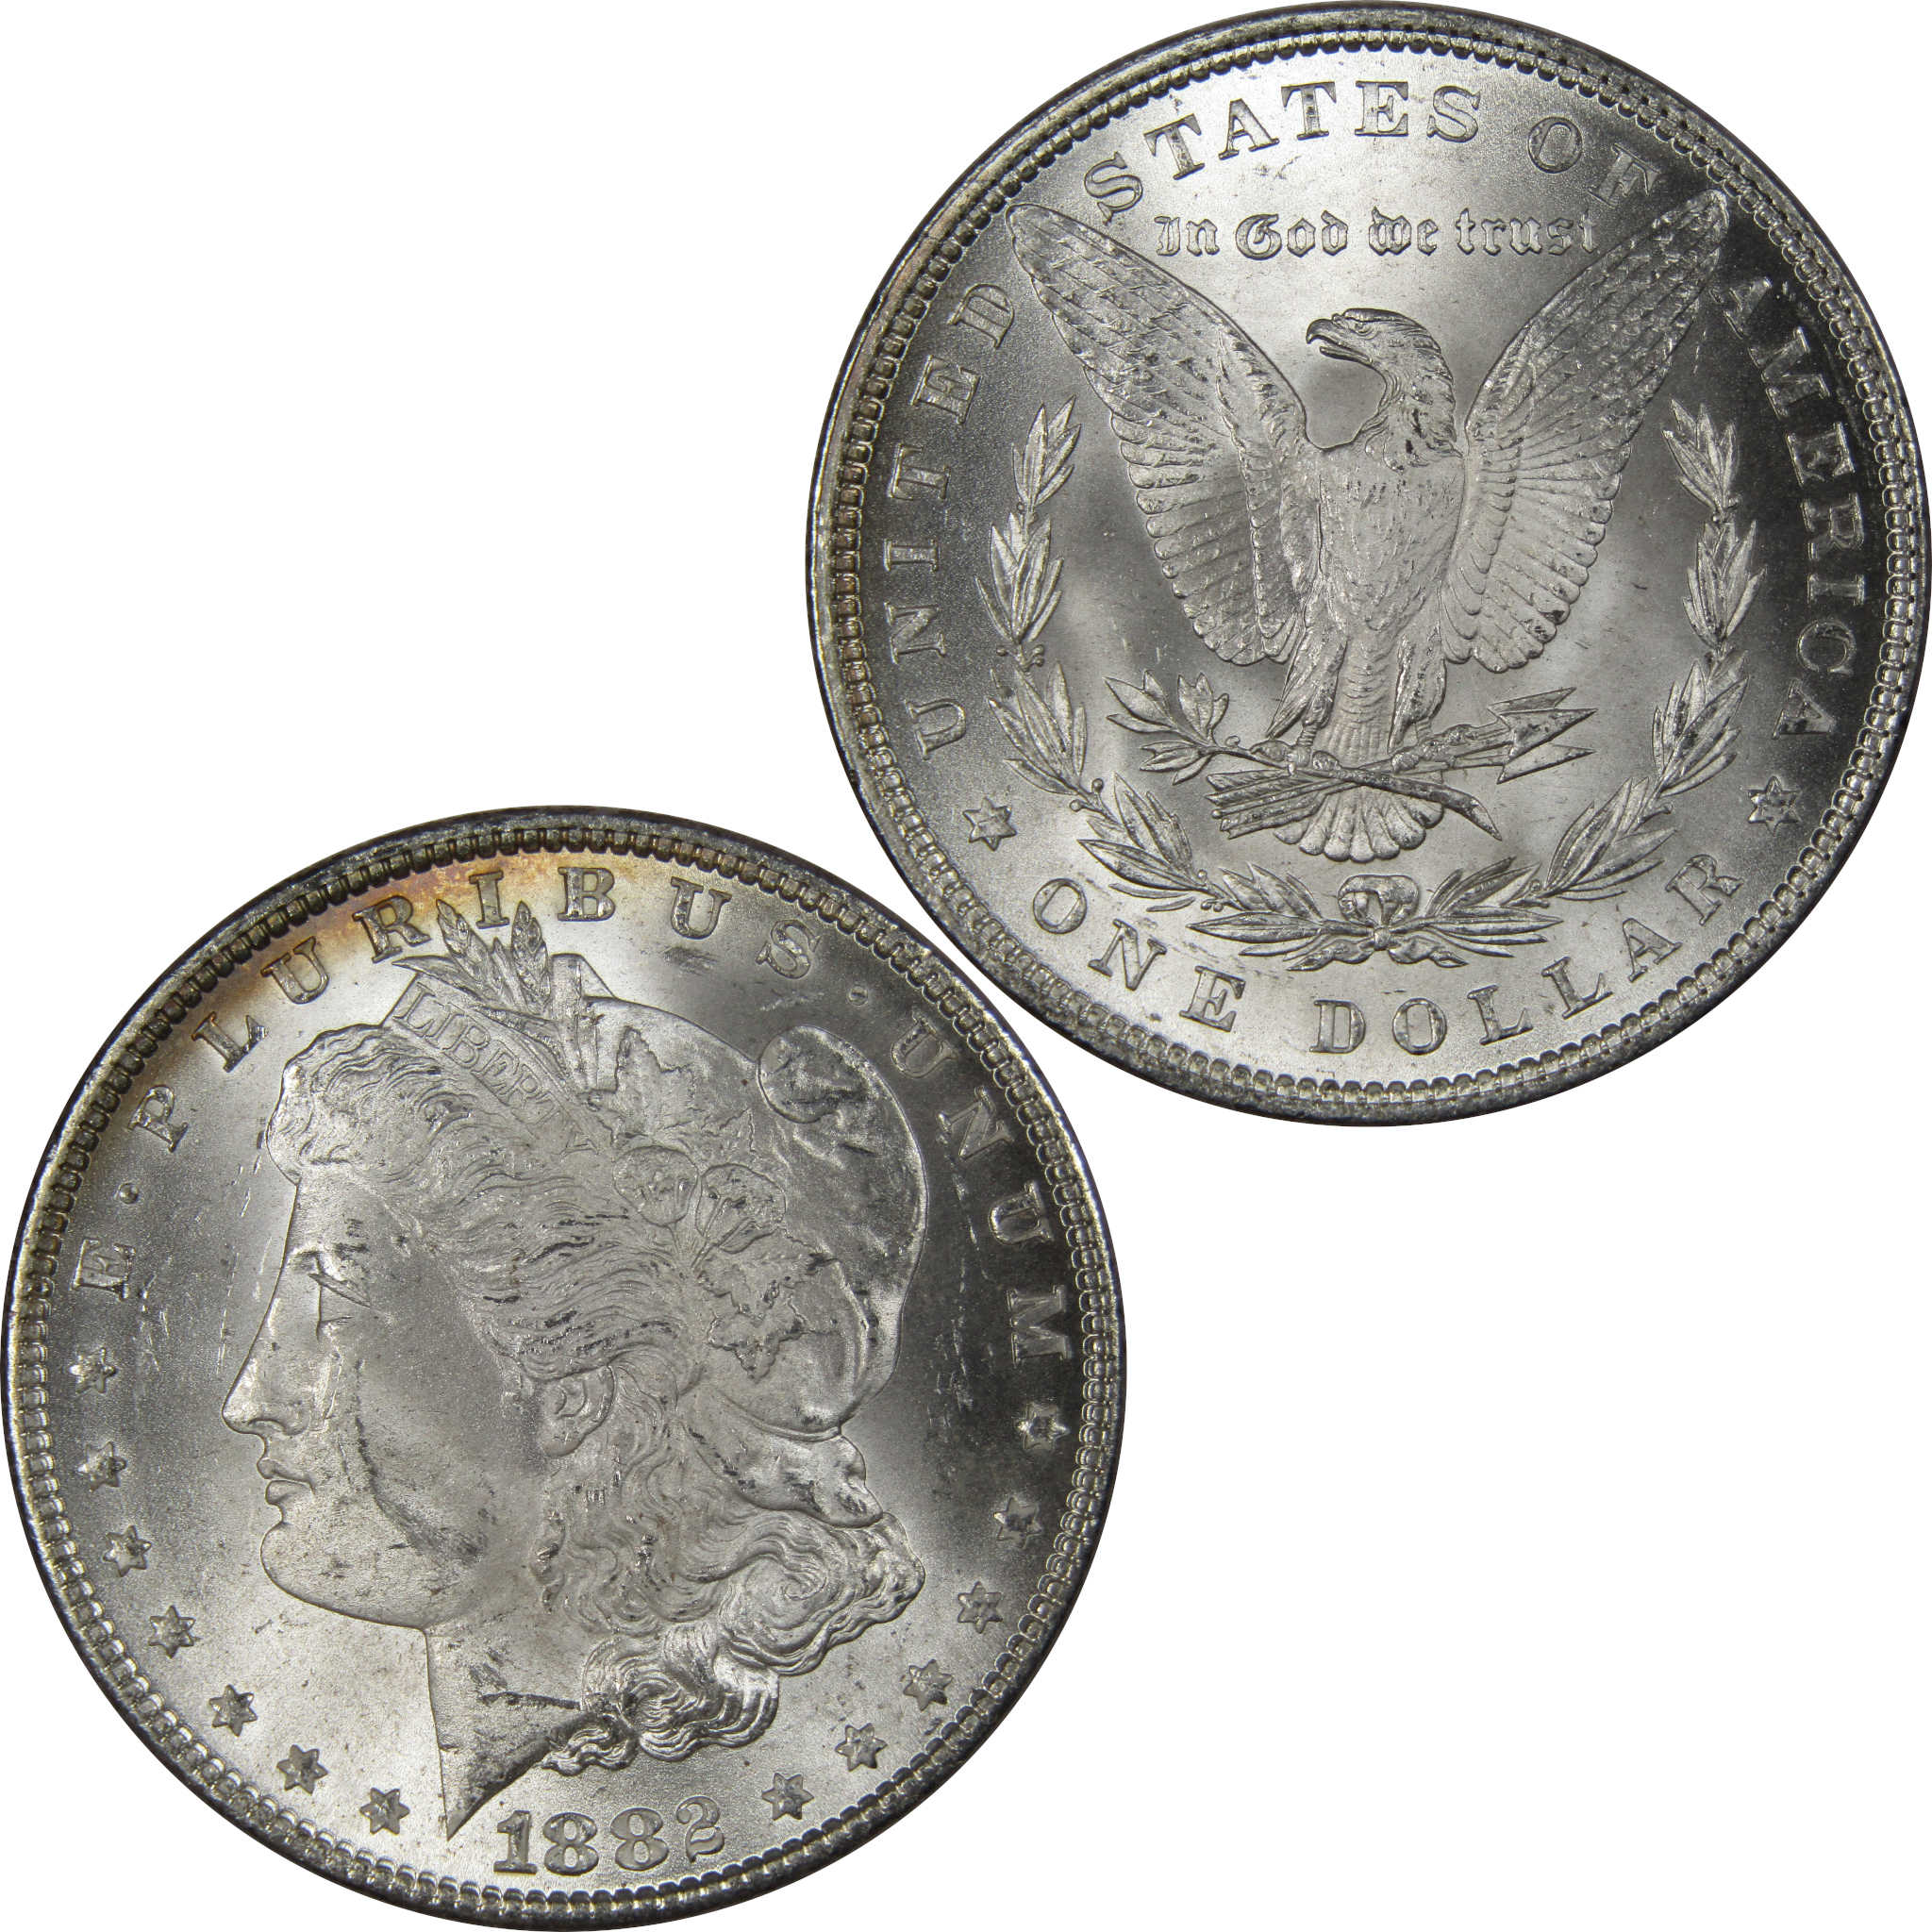 1882 Morgan Dollar BU Uncirculated Mint State 90% Silver SKU:IPC9651 - Morgan coin - Morgan silver dollar - Morgan silver dollar for sale - Profile Coins &amp; Collectibles